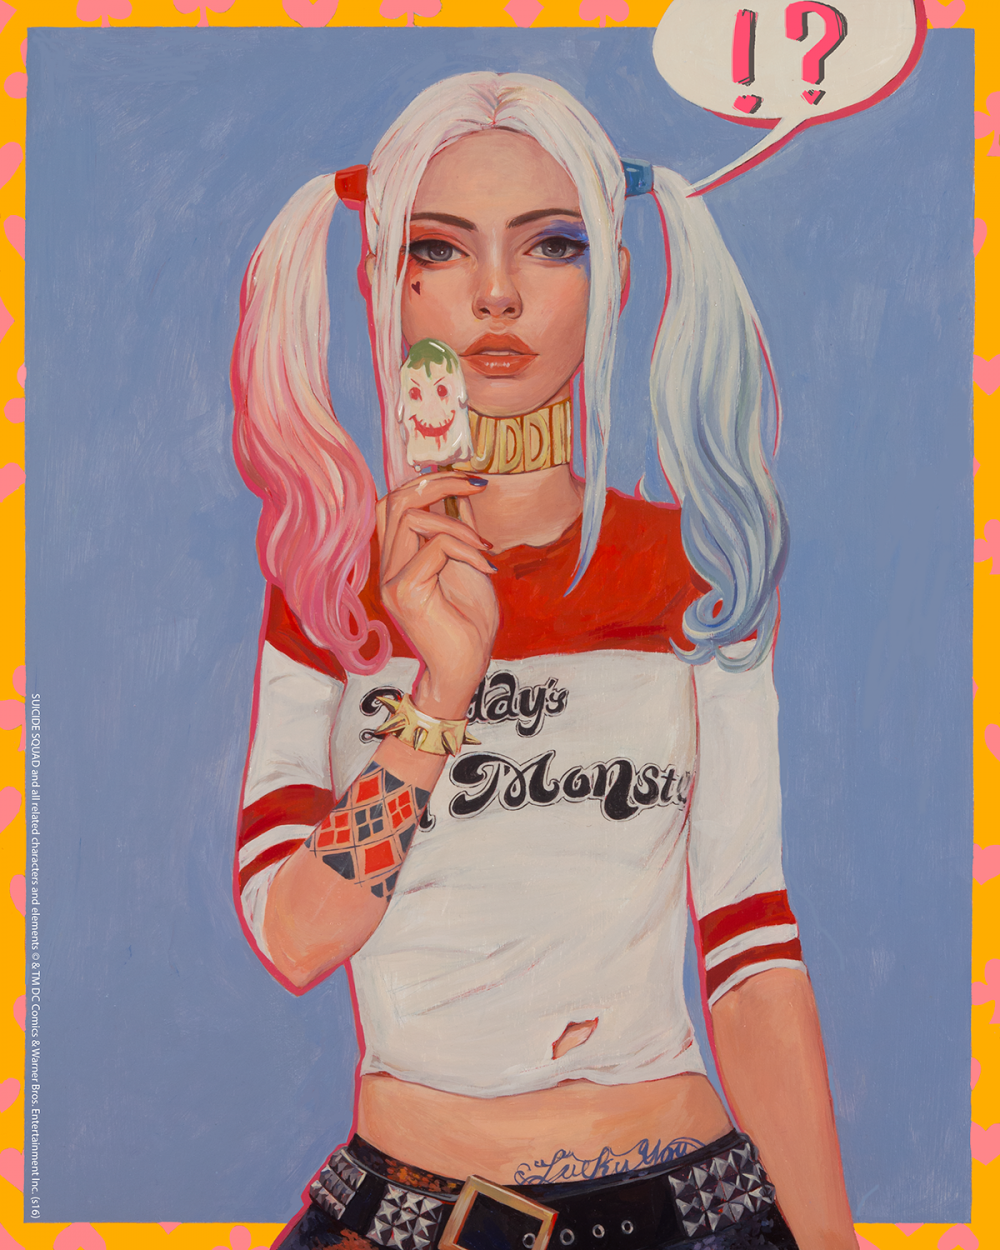 "Harley" by Helice Wen.  16" x 20" Giclee.  Ed of 100.  $40